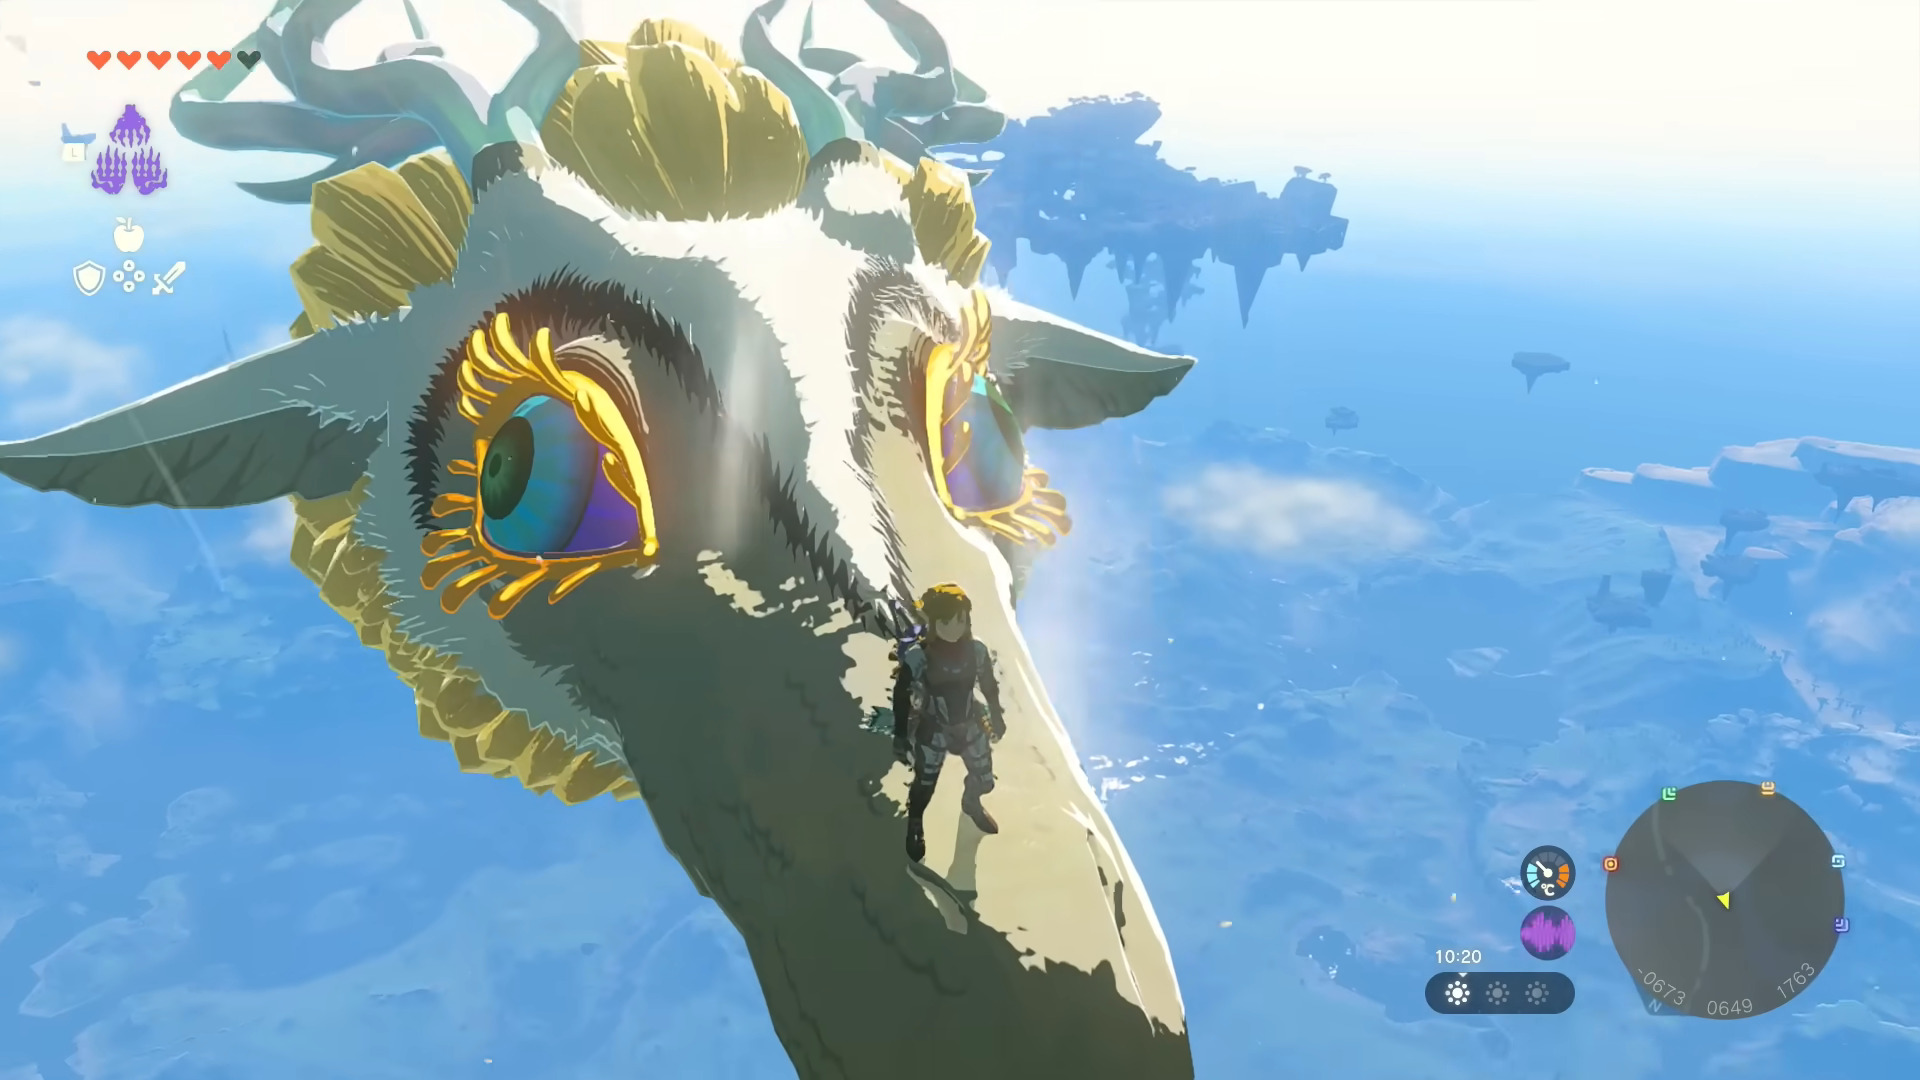 Link stood on the Light Dragon's face